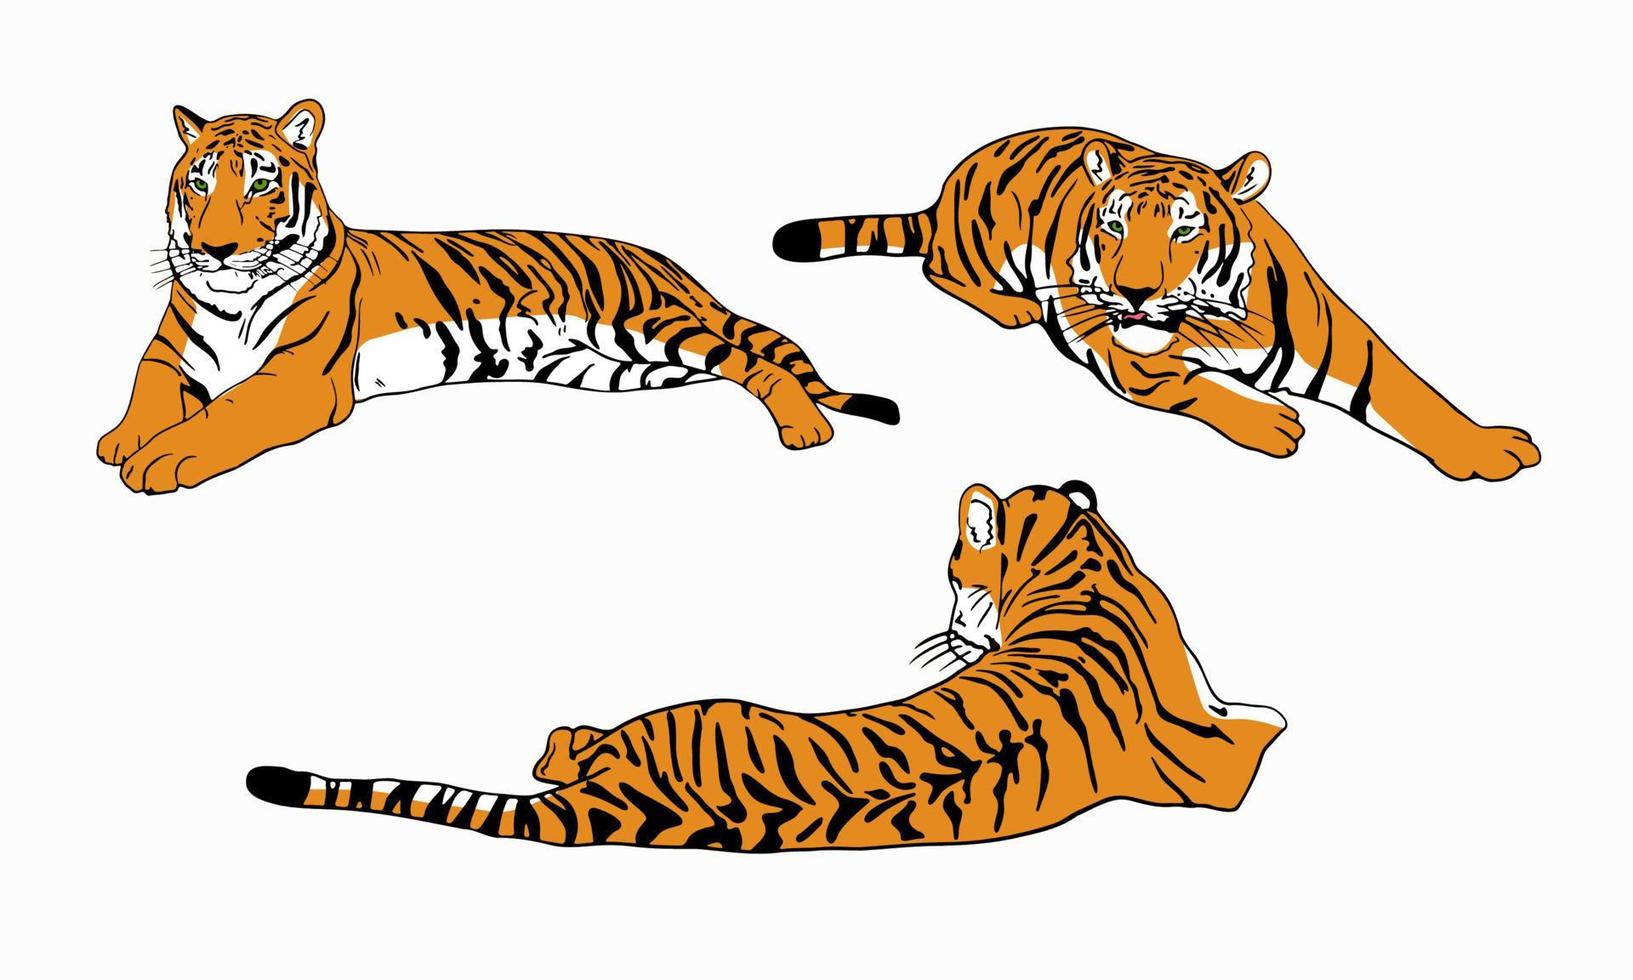 Set of color tigers simple chinese tiger design vector illustration isolated on white background